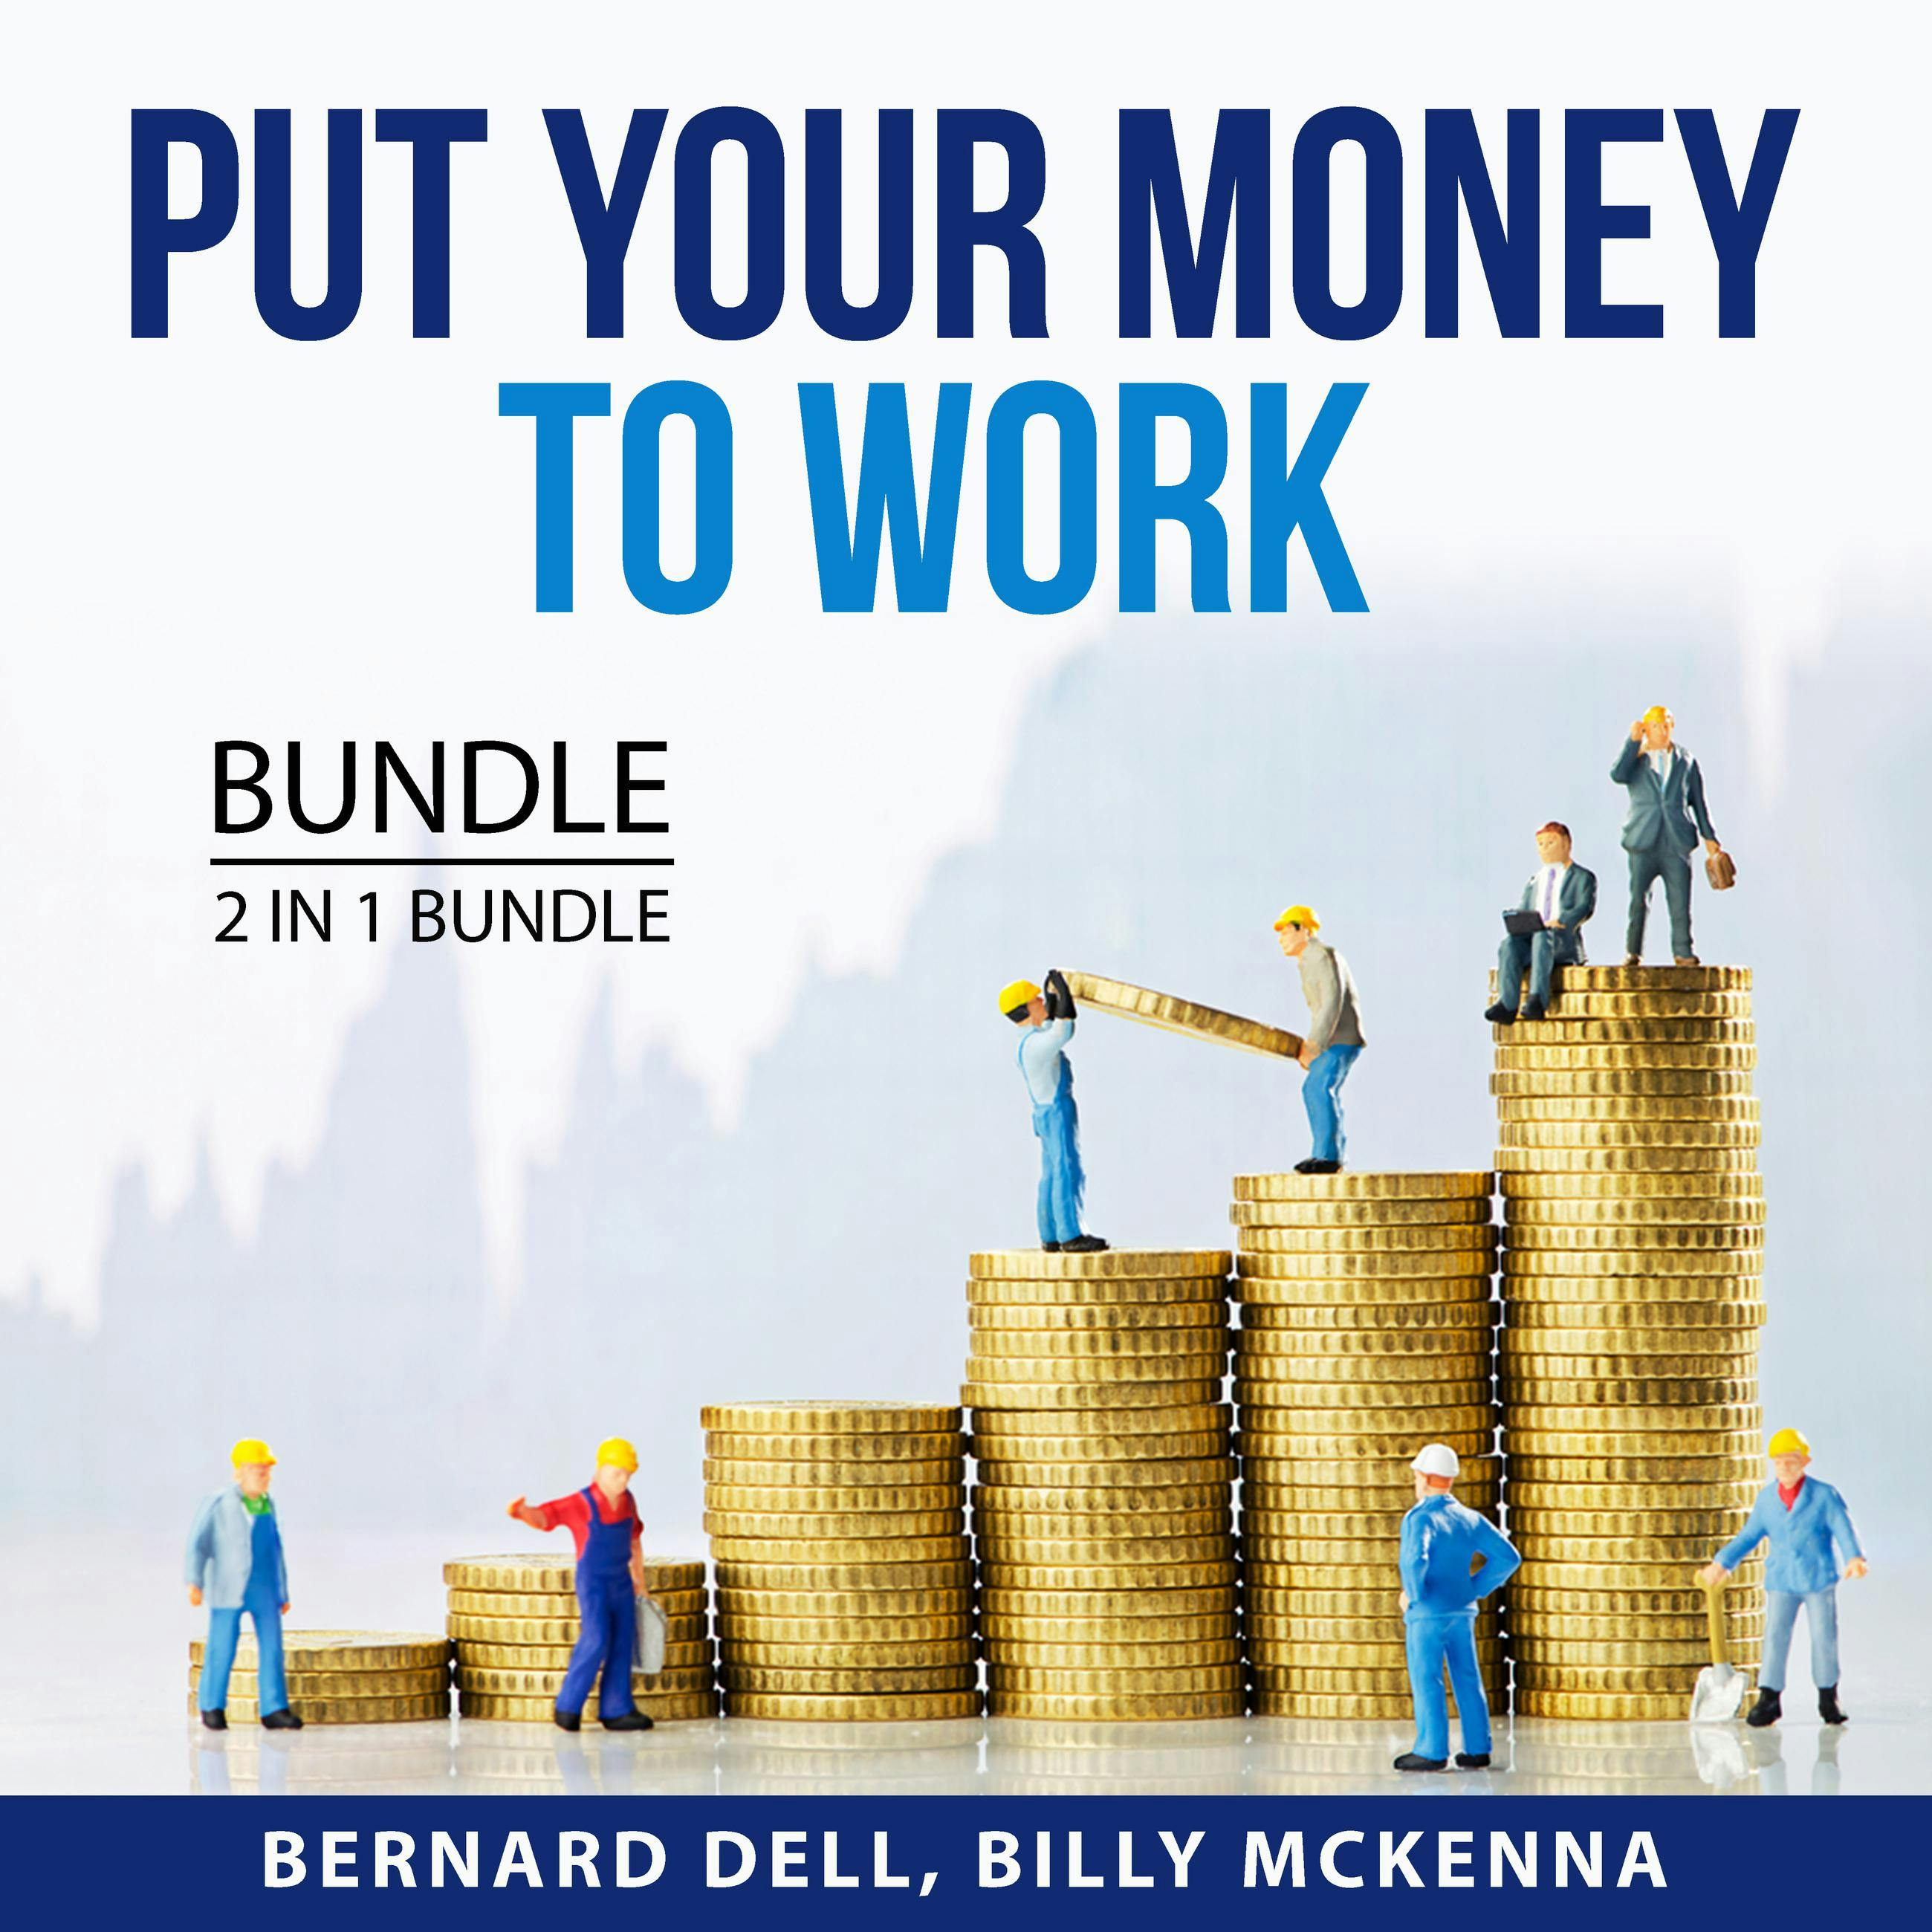 Put Your Money to Work Bundle, 2 in 1 Bundle: Forex Trading Secrets and Real Estate Investment Success - Billy McKenna, Bernard Dell